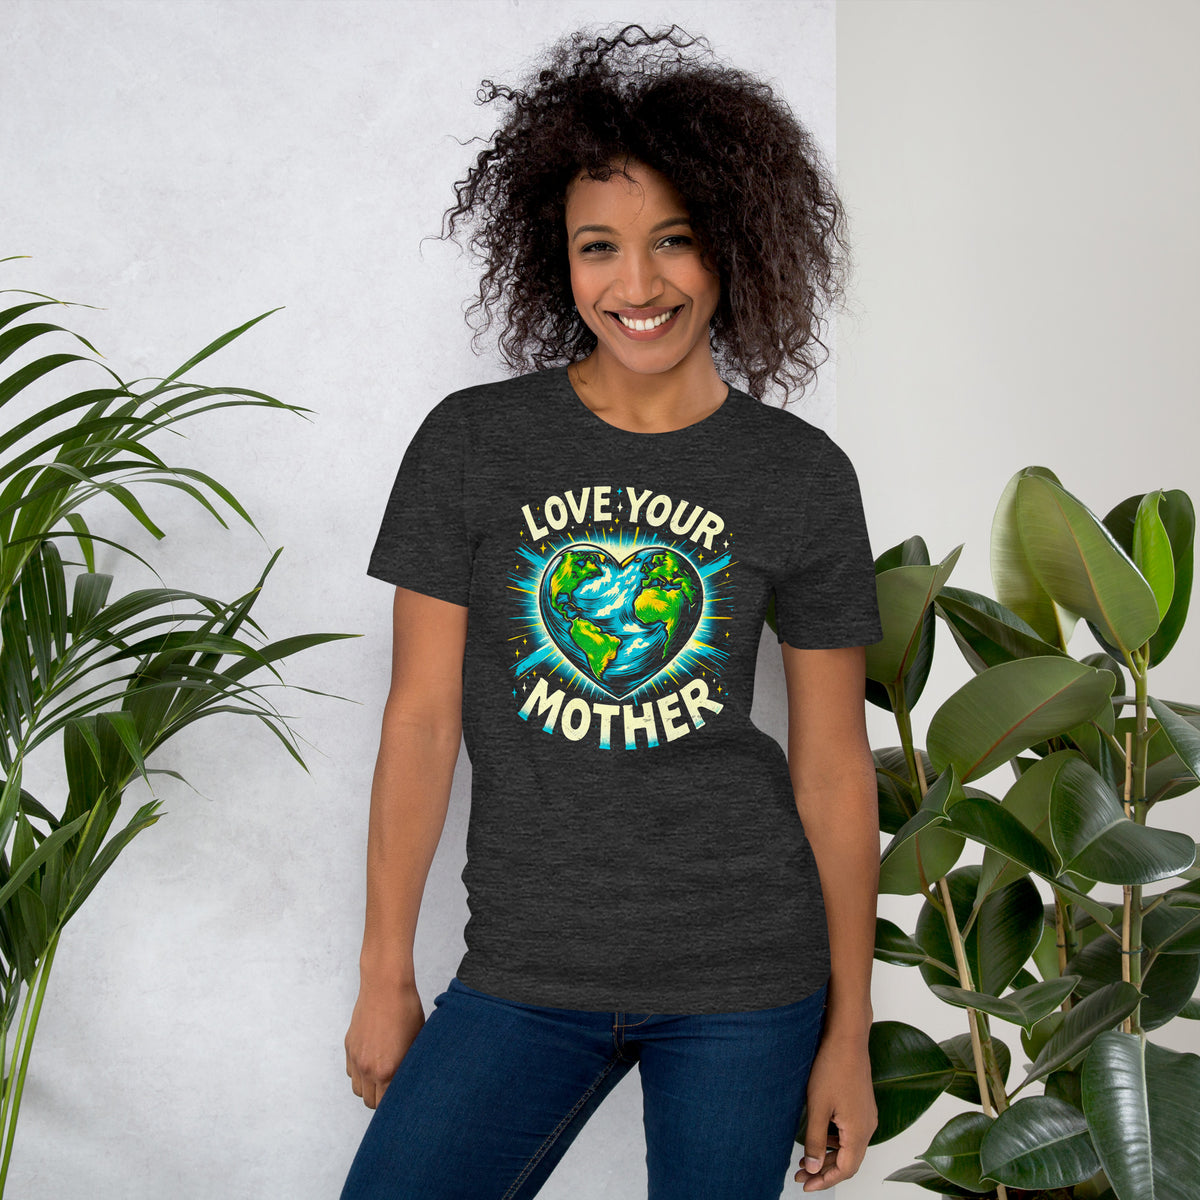 Love Your Mother Shirt, Heart Shaped Earth Tee, Celebrate Mother Earth Every Day, Environmental Awareness, Save the Planet